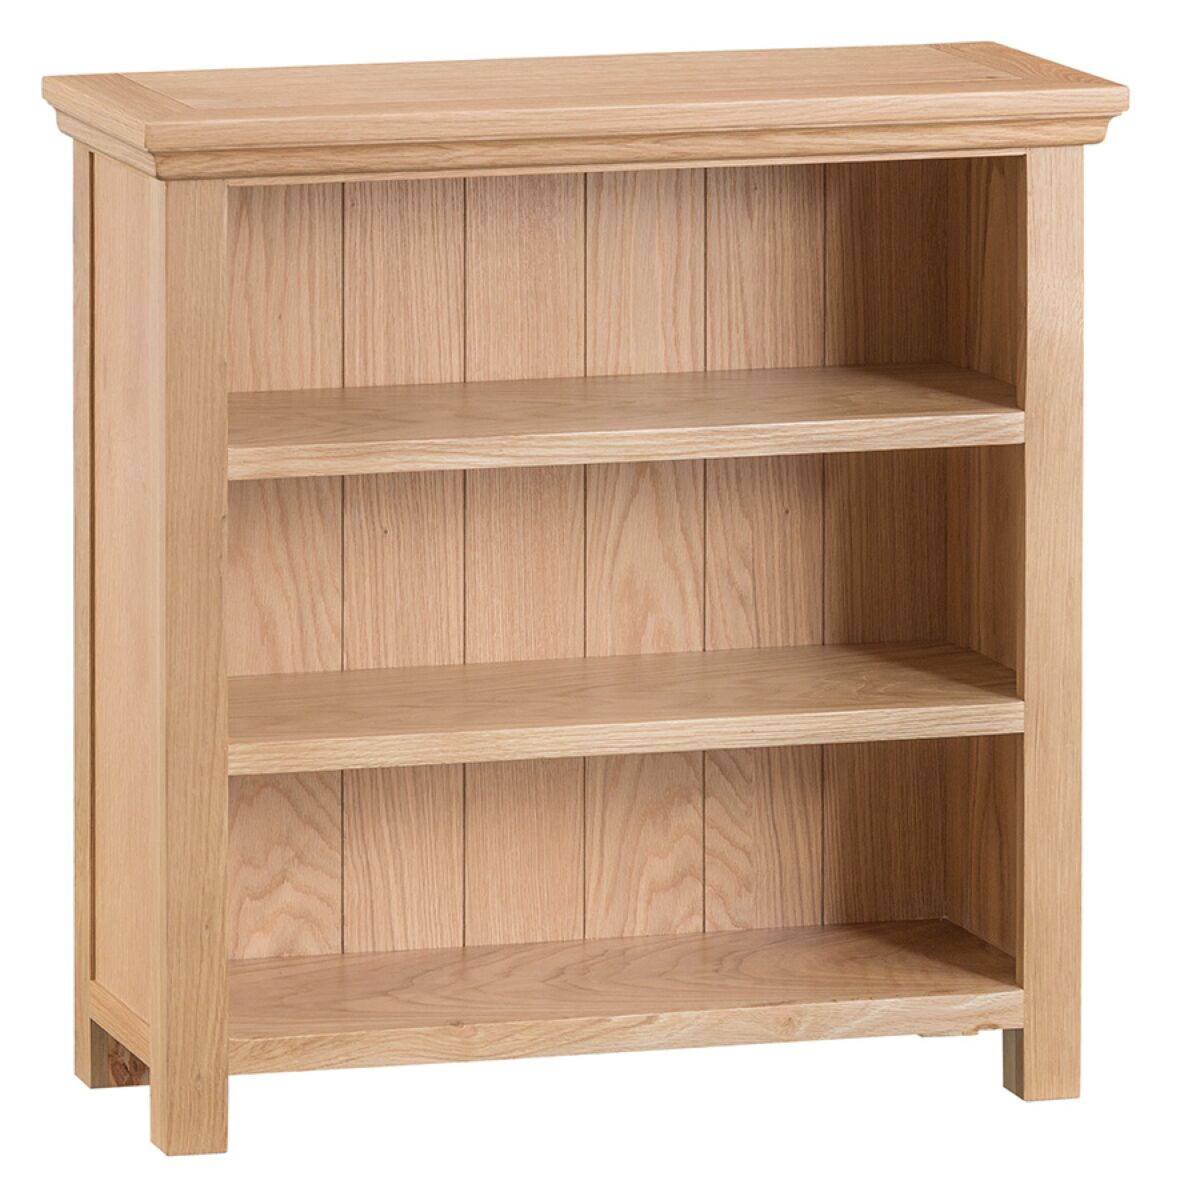 Fenwin Ready Assembled Wide Oak Bookcase Small intended for proportions 1200 X 1200